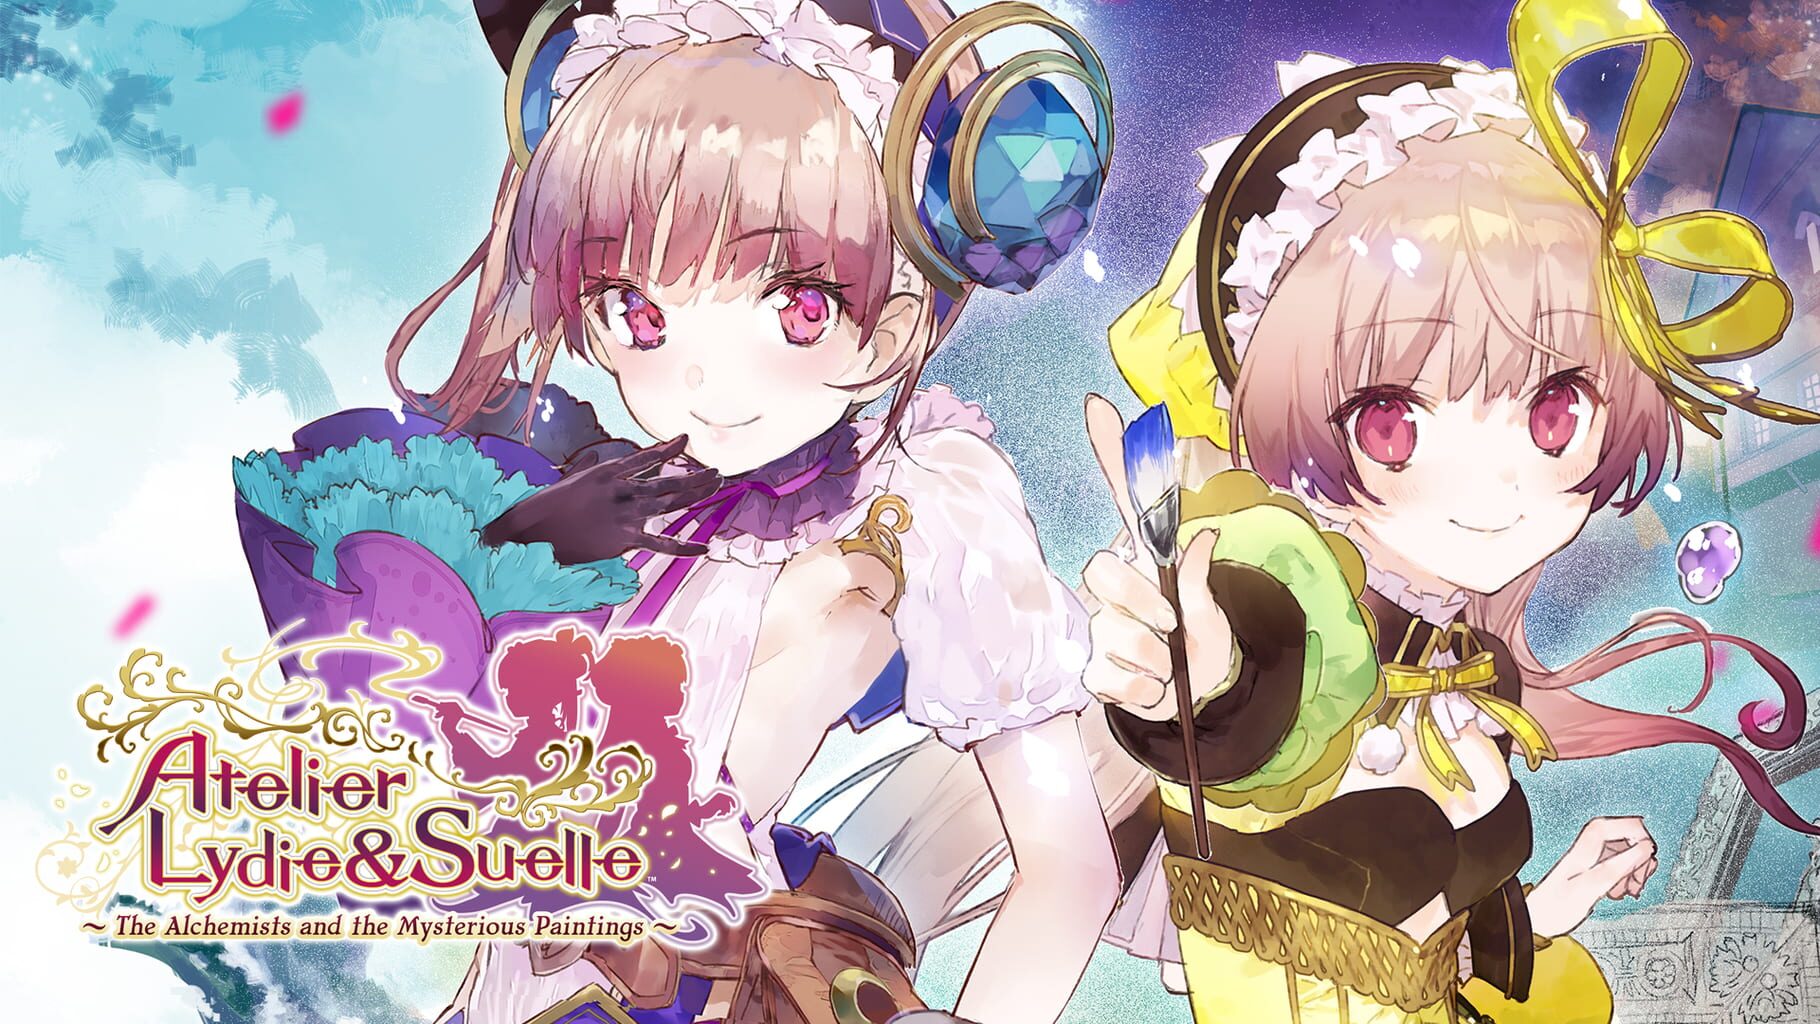 Artwork for Atelier Lydie & Suelle: The Alchemists and the Mysterious Paintings